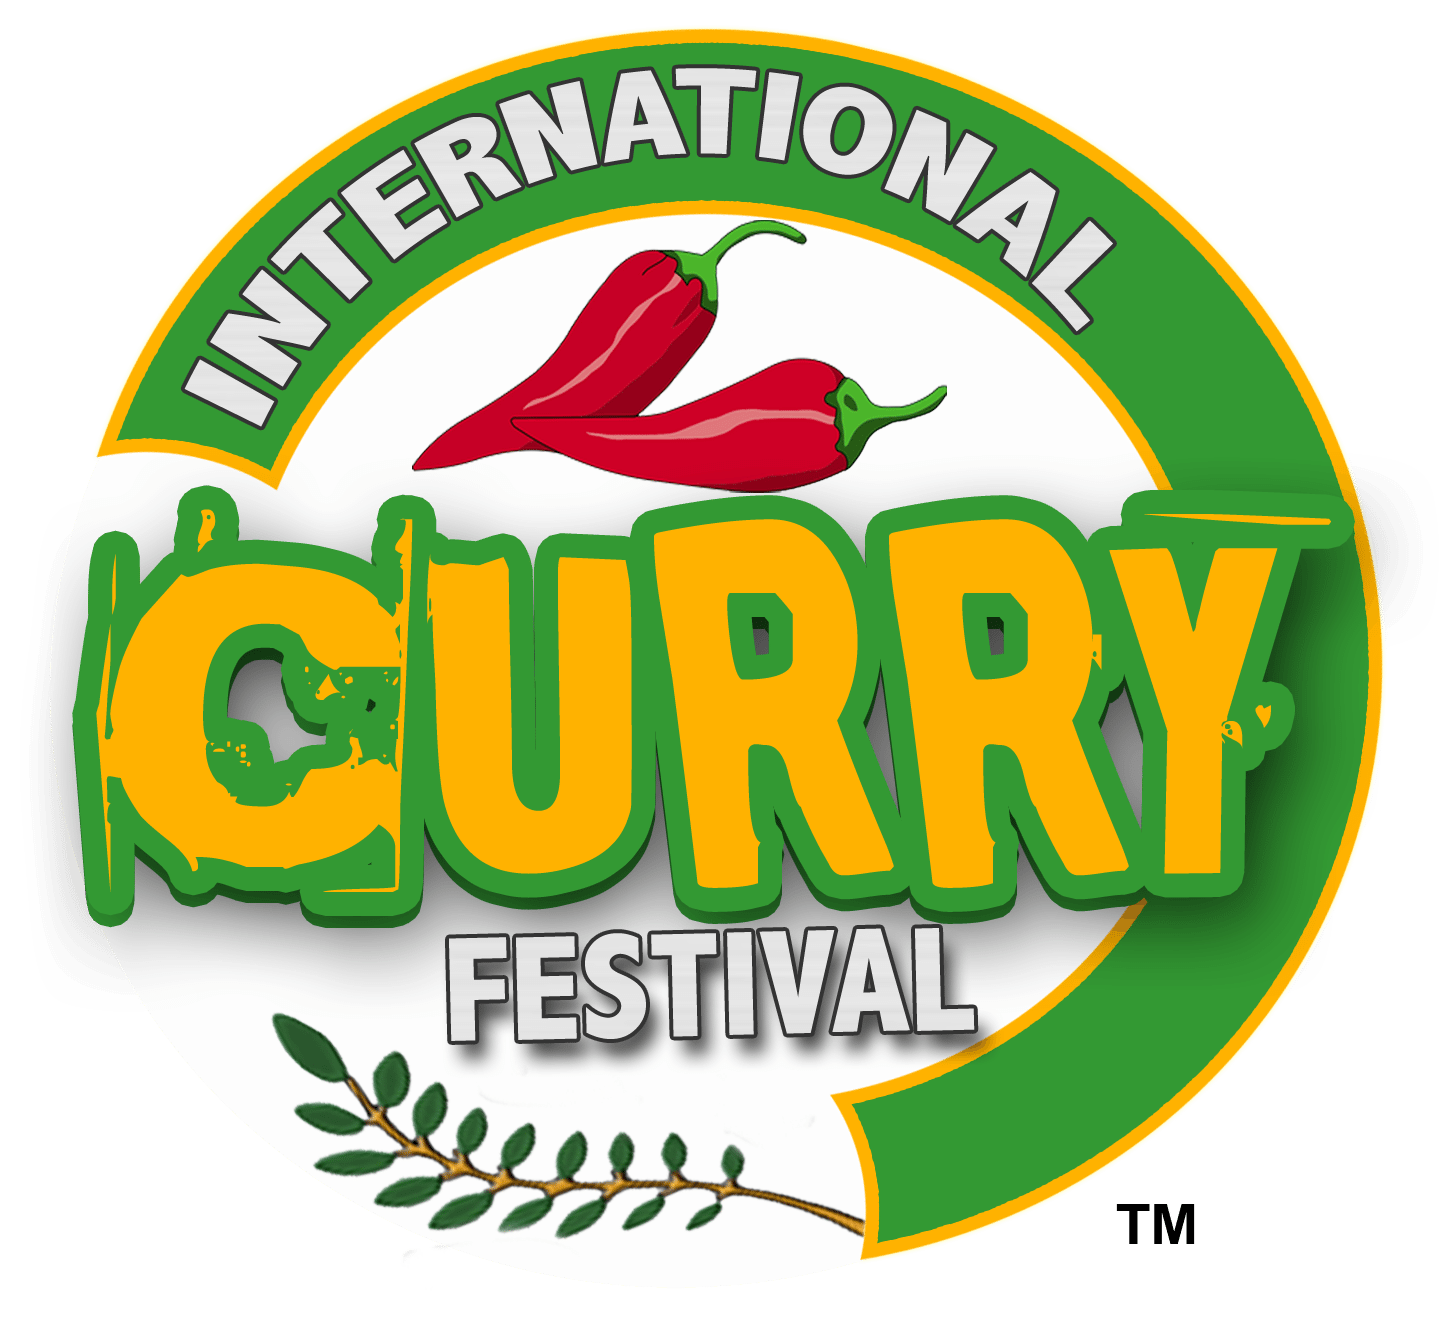 Putting Pasco Kids ‘First’ | Tampa Bay International Curry Festival’s Support of Local Charities